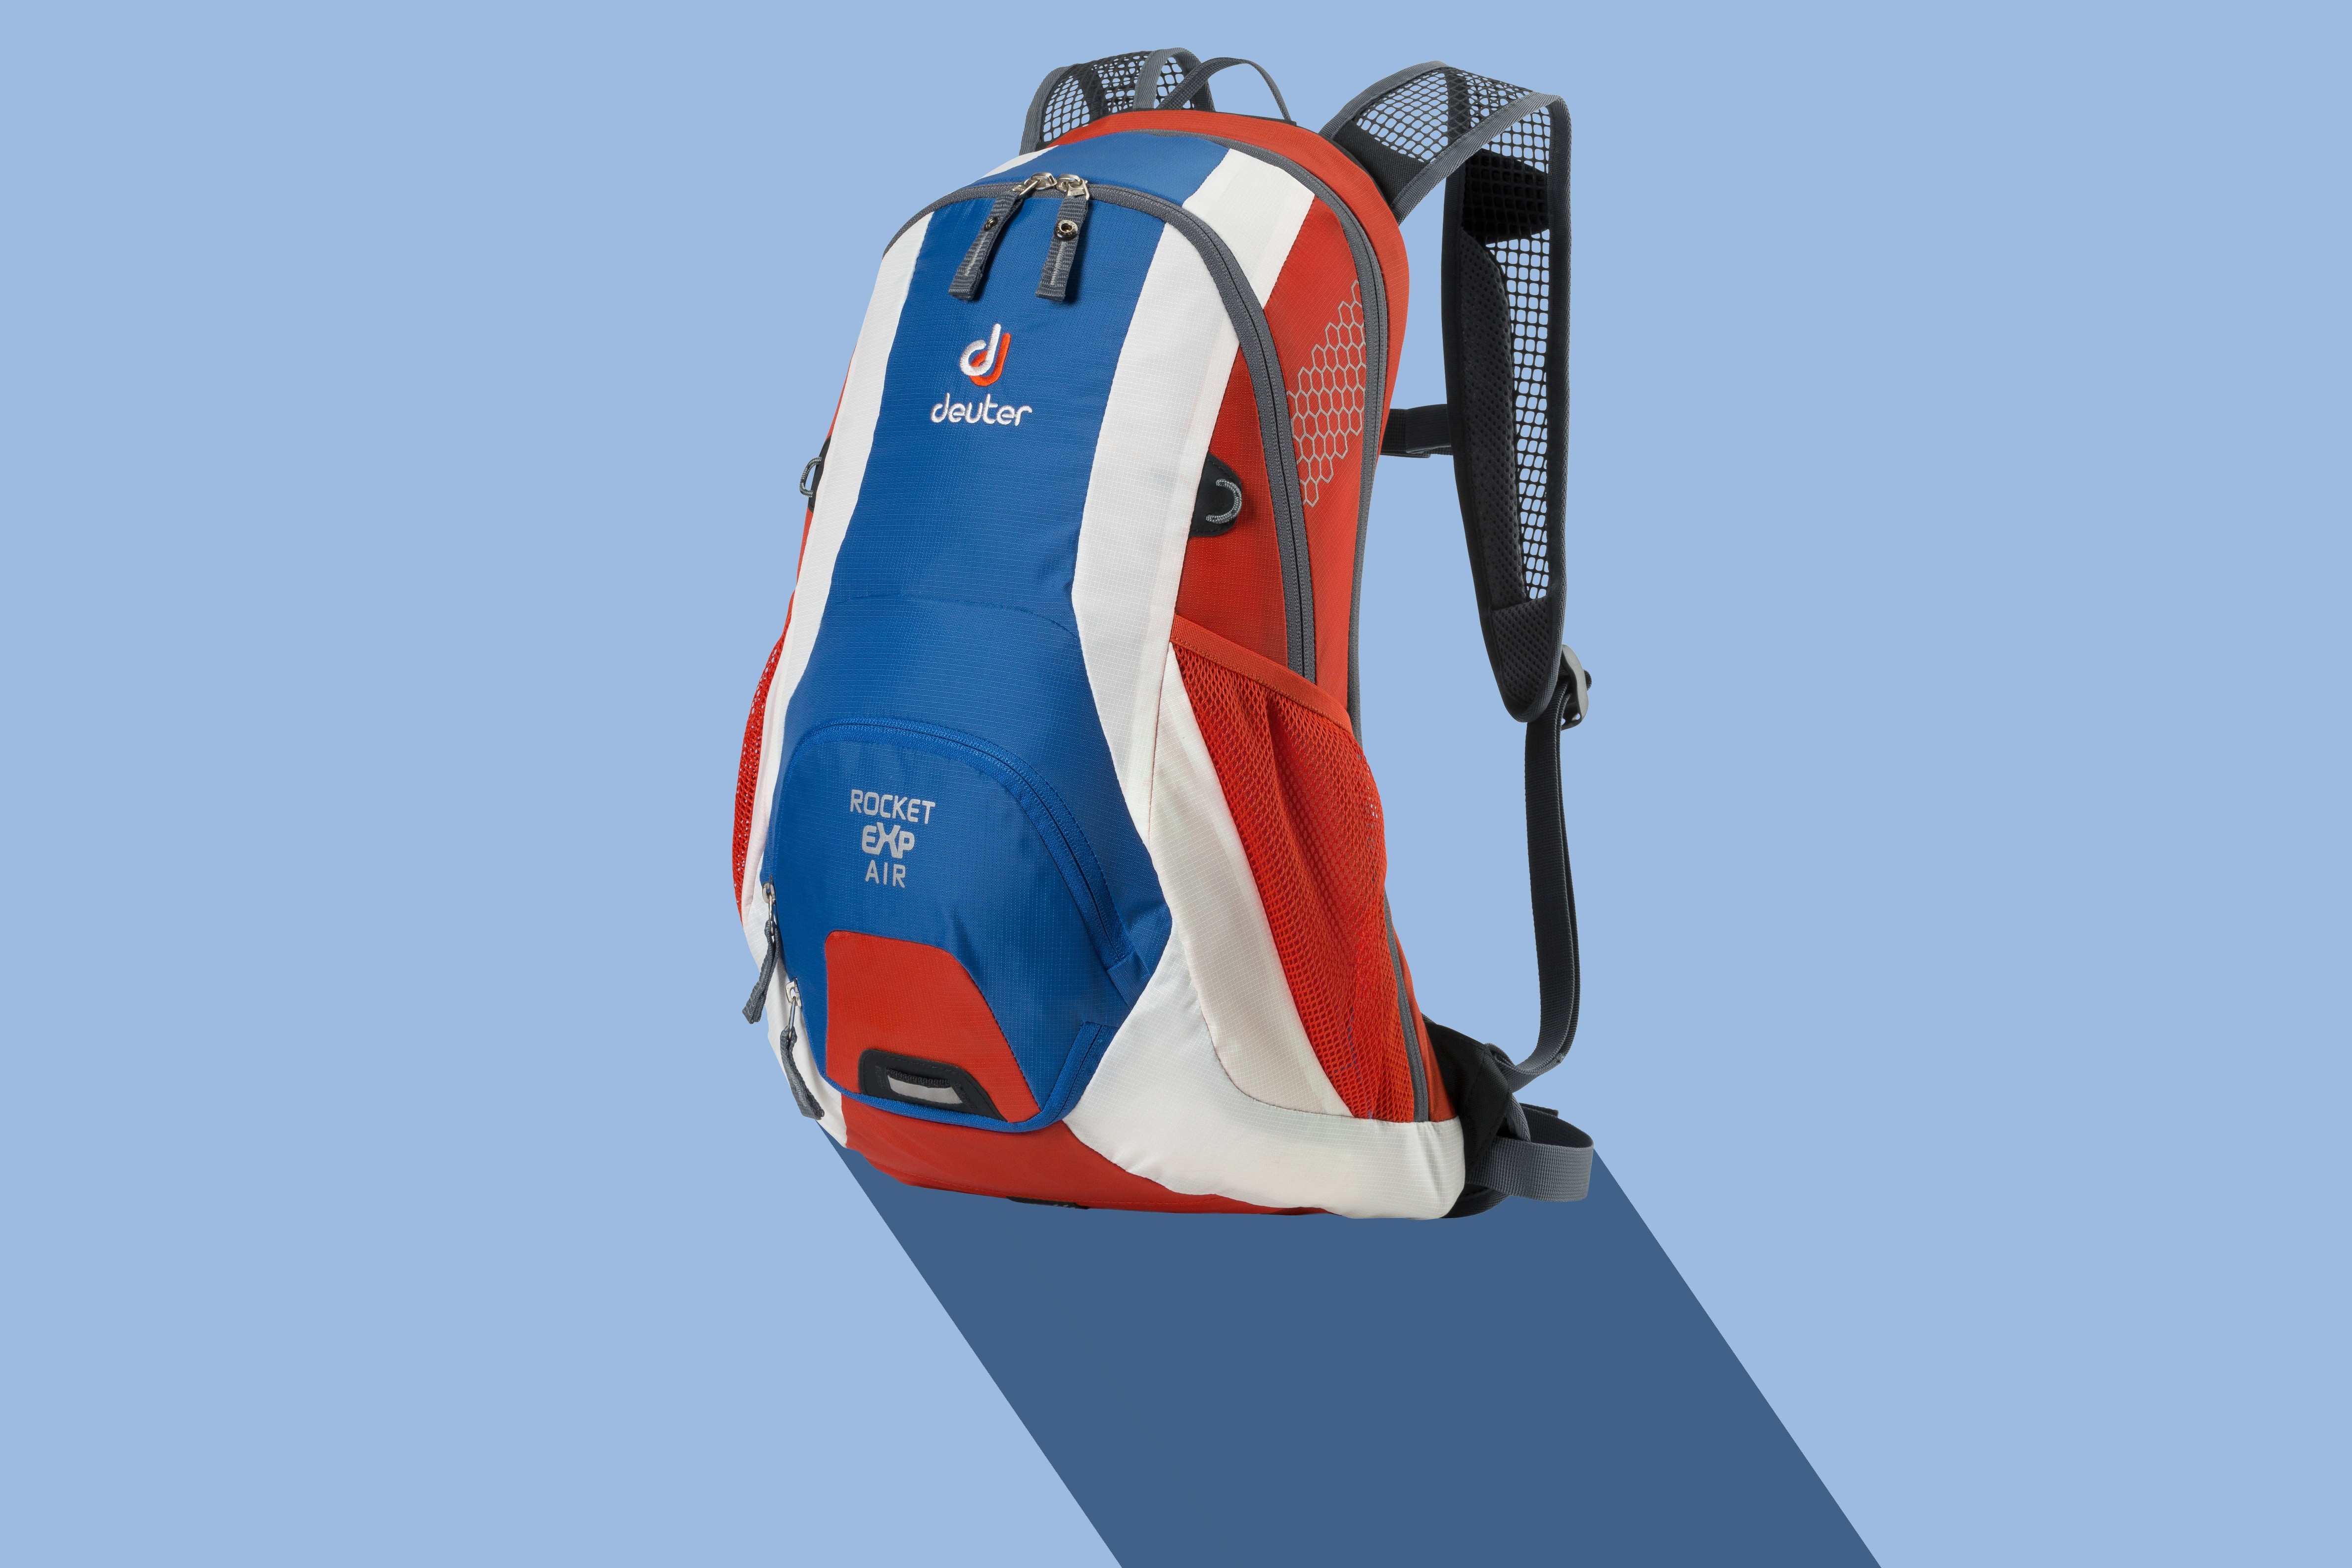 White, Backpack, Sport, Blue, Leisure, blue, red